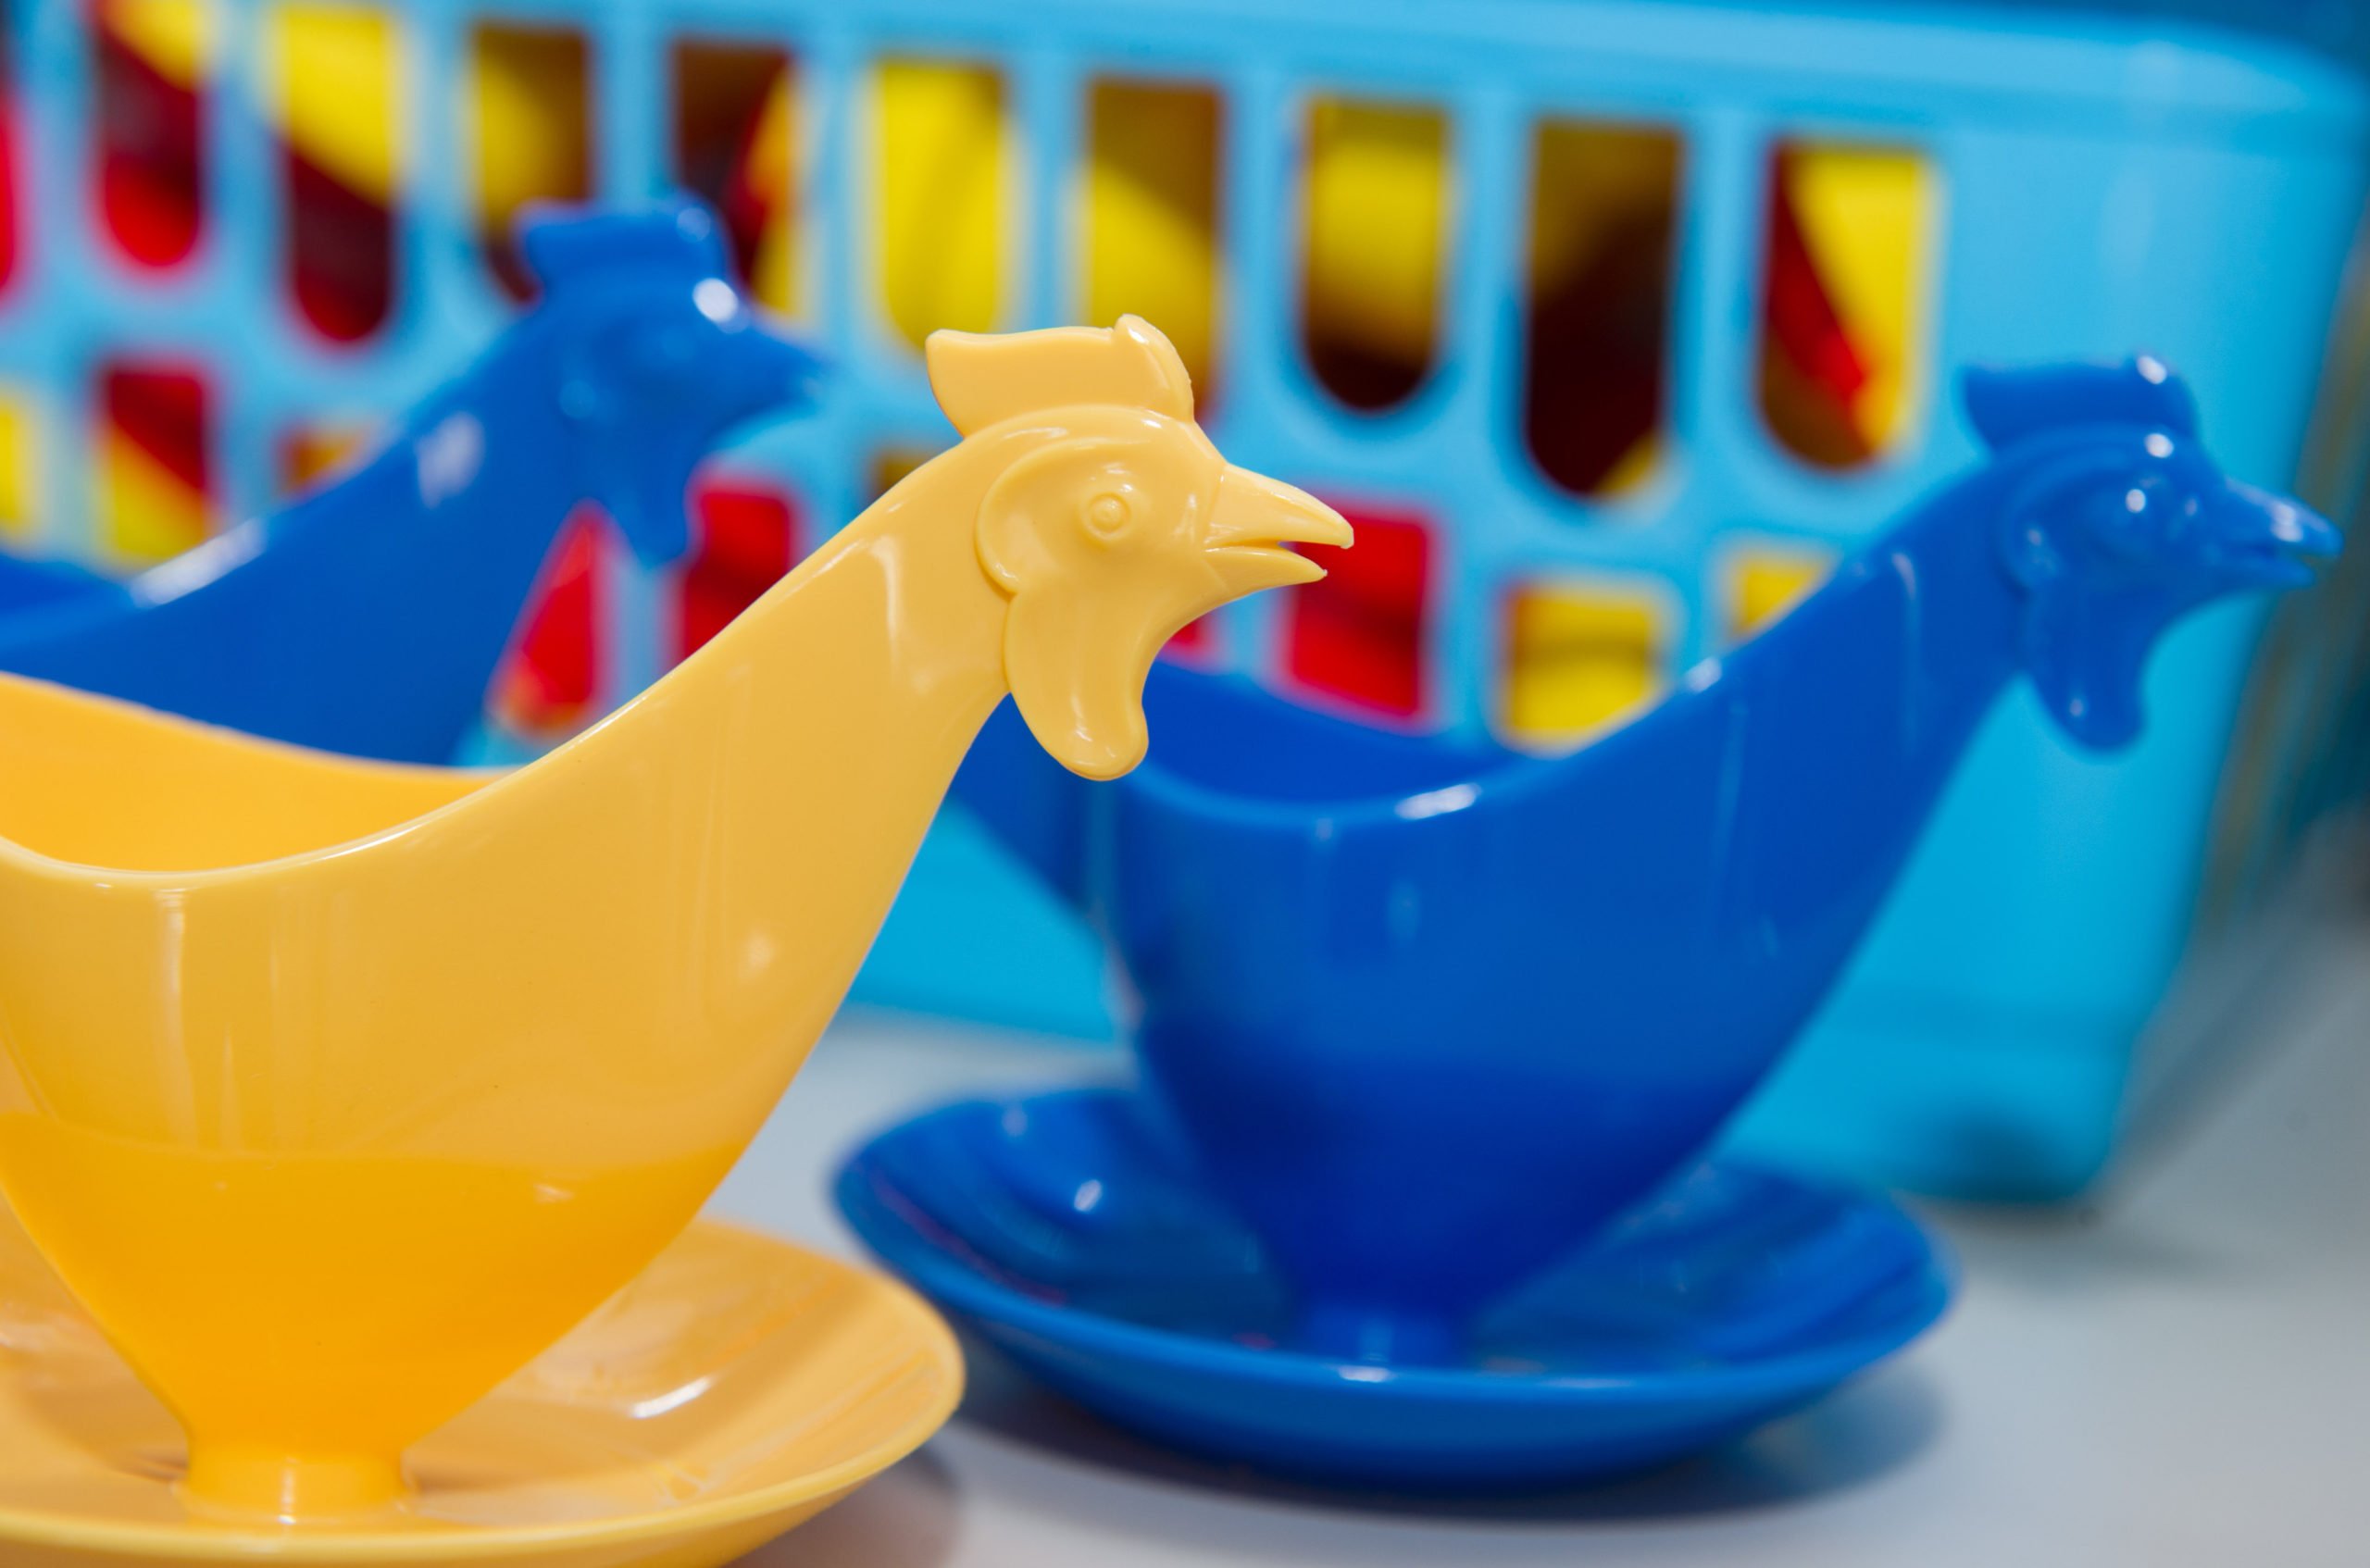 Egg cups in the shape of chickens, of the classic GDR design.